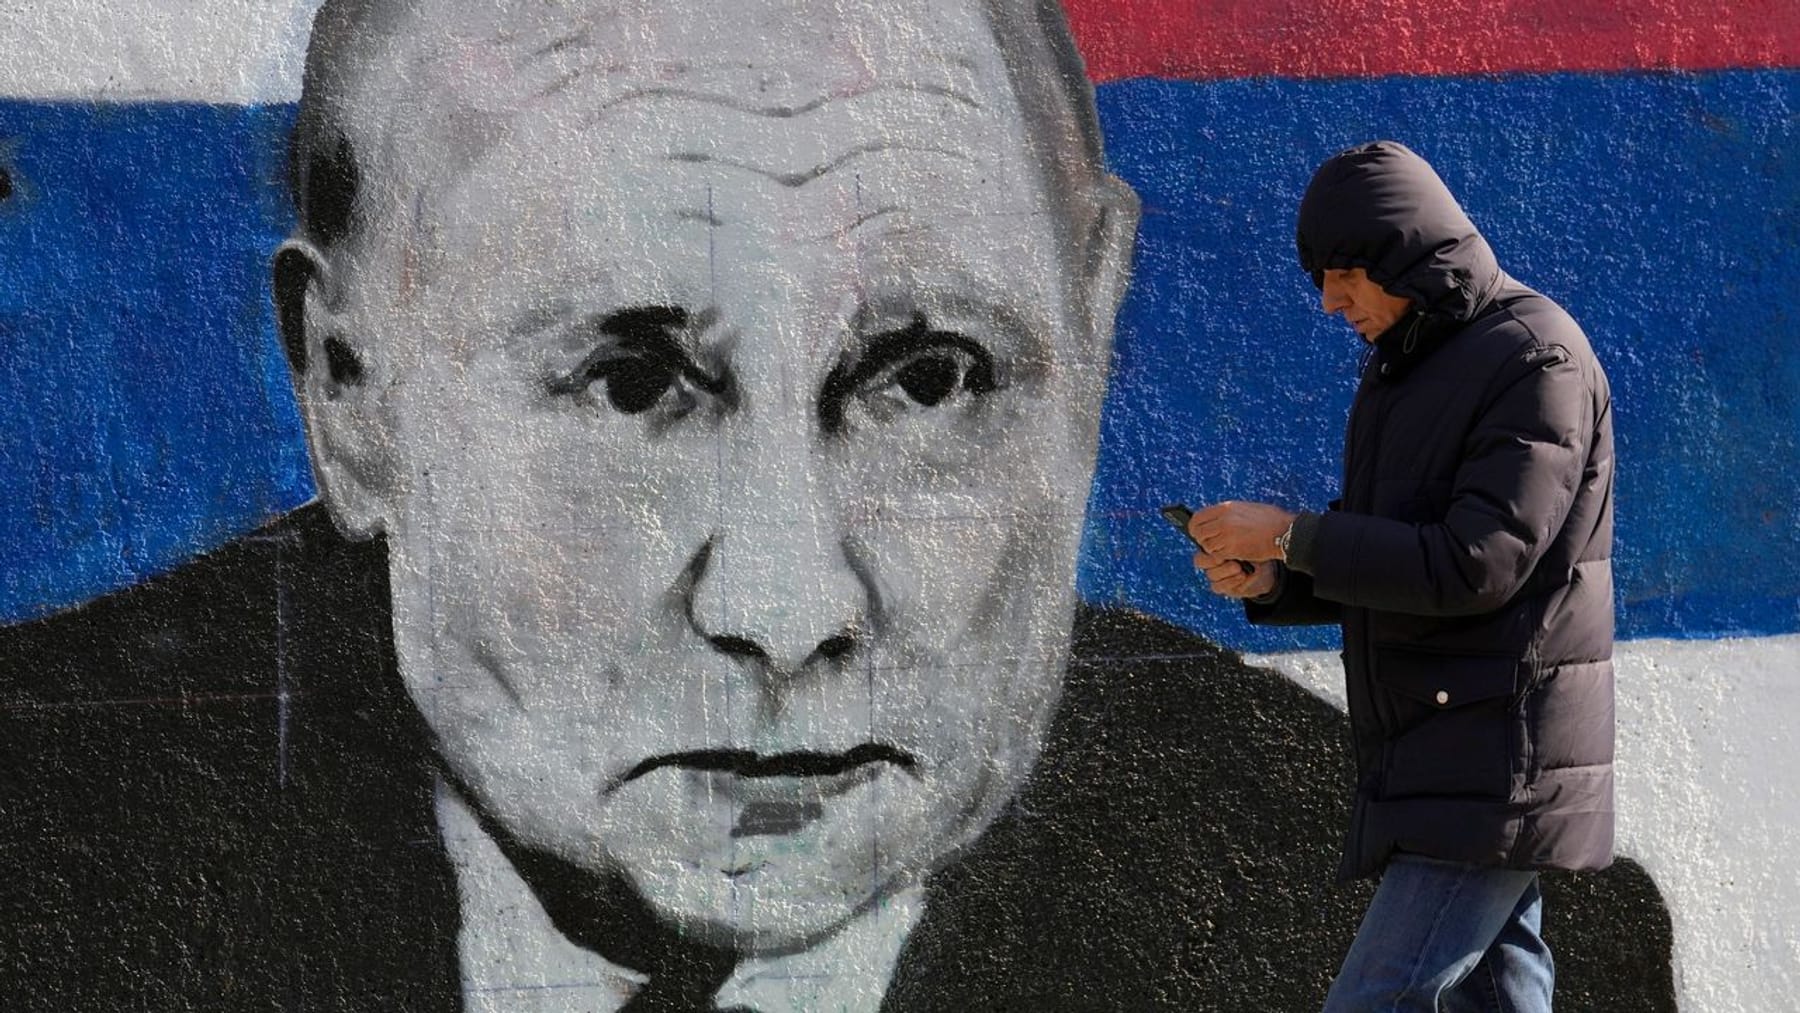 Will Serbia shift from being a supporter of Putin’s opponent?  – the relationship deteriorated